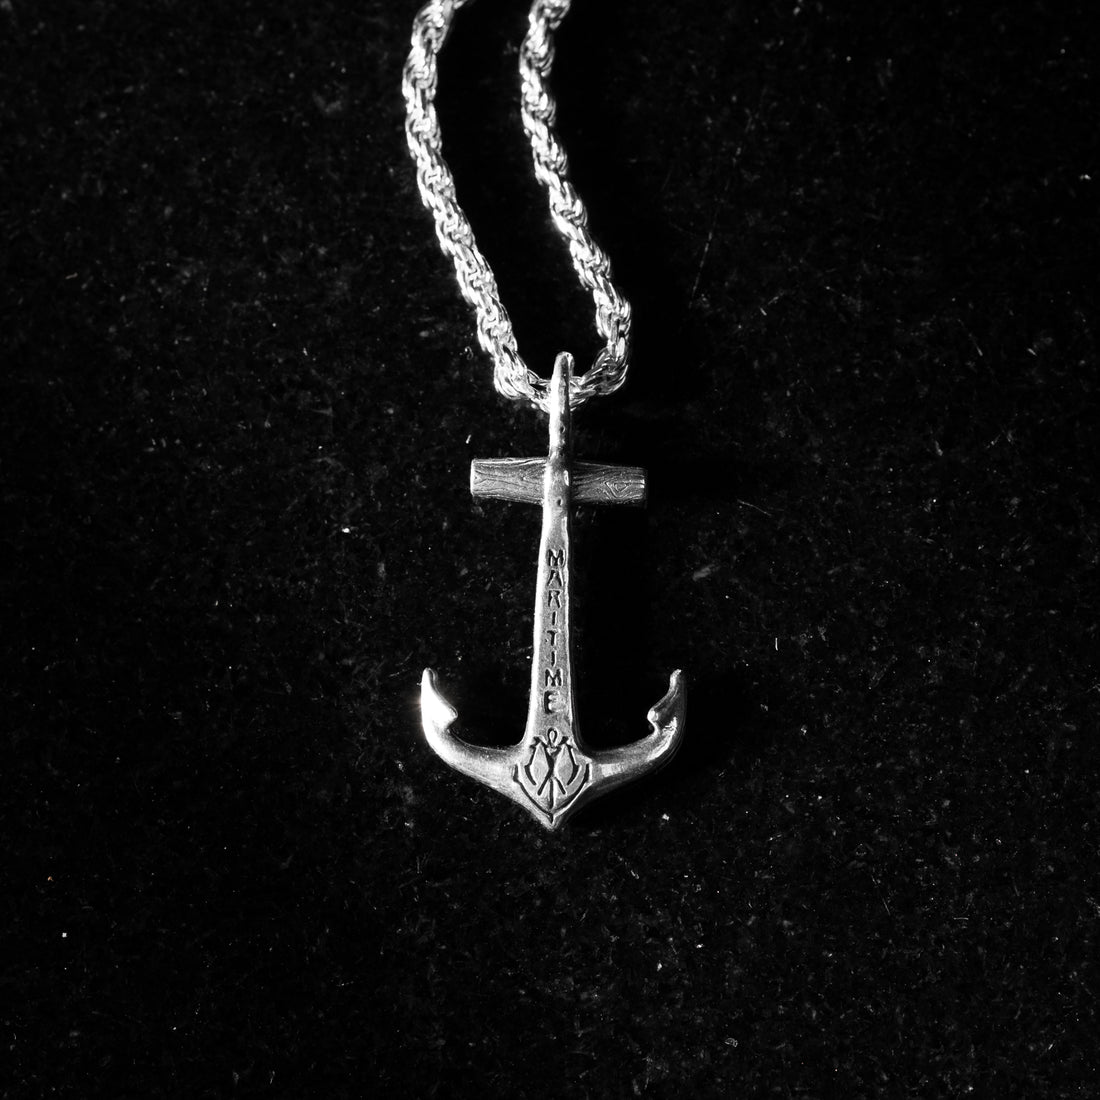 Men's Boy's Stainless Steel Pendant Chain Silver Tone Anchor Necklace -  Navy | eBay